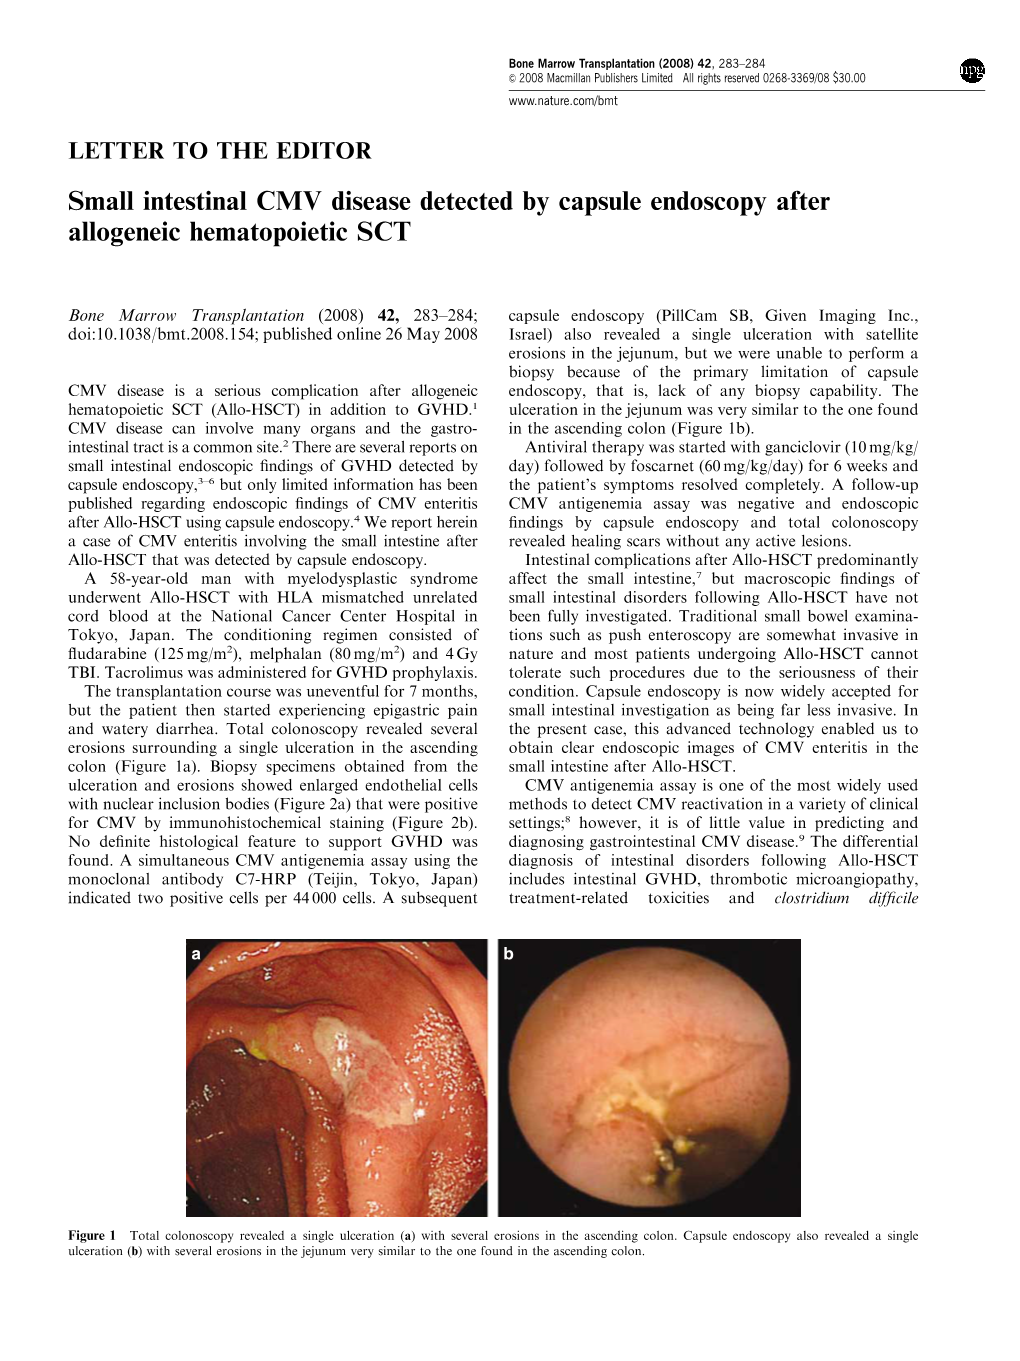 Small Intestinal CMV Disease Detected by Capsule Endoscopy After Allogeneic Hematopoietic SCT